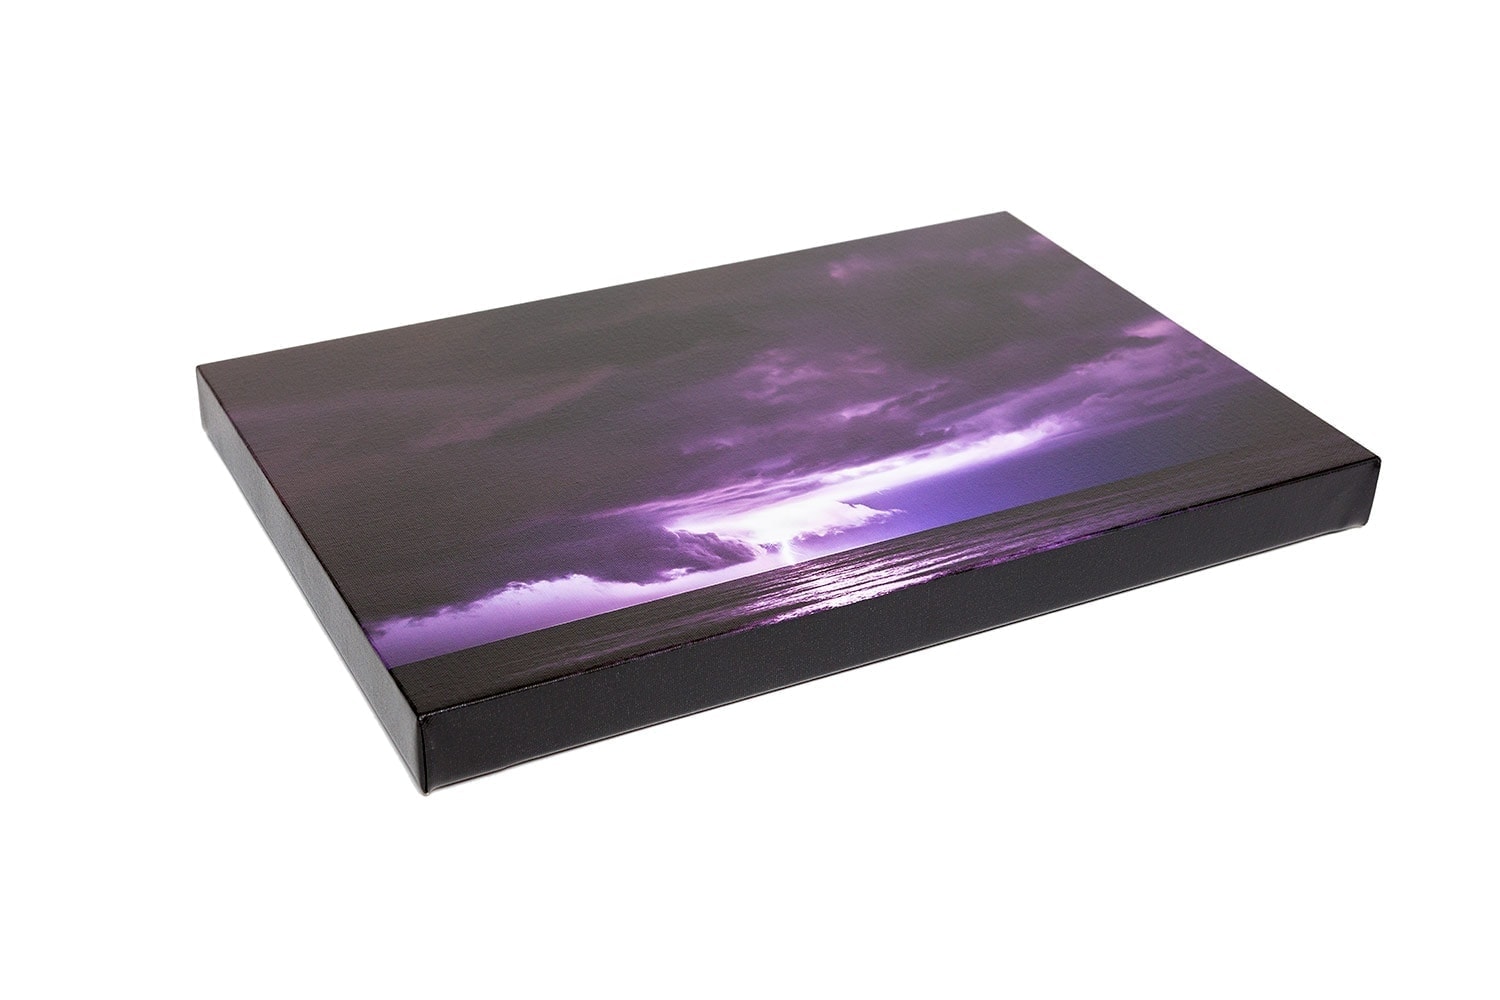 A canvas gallery wrap constructed with fine art canvas stretched over a wooden frame and finished with a protective semi-gloss laminate. Canvas gallery wraps are ready-to-hang wall decor for home or office.